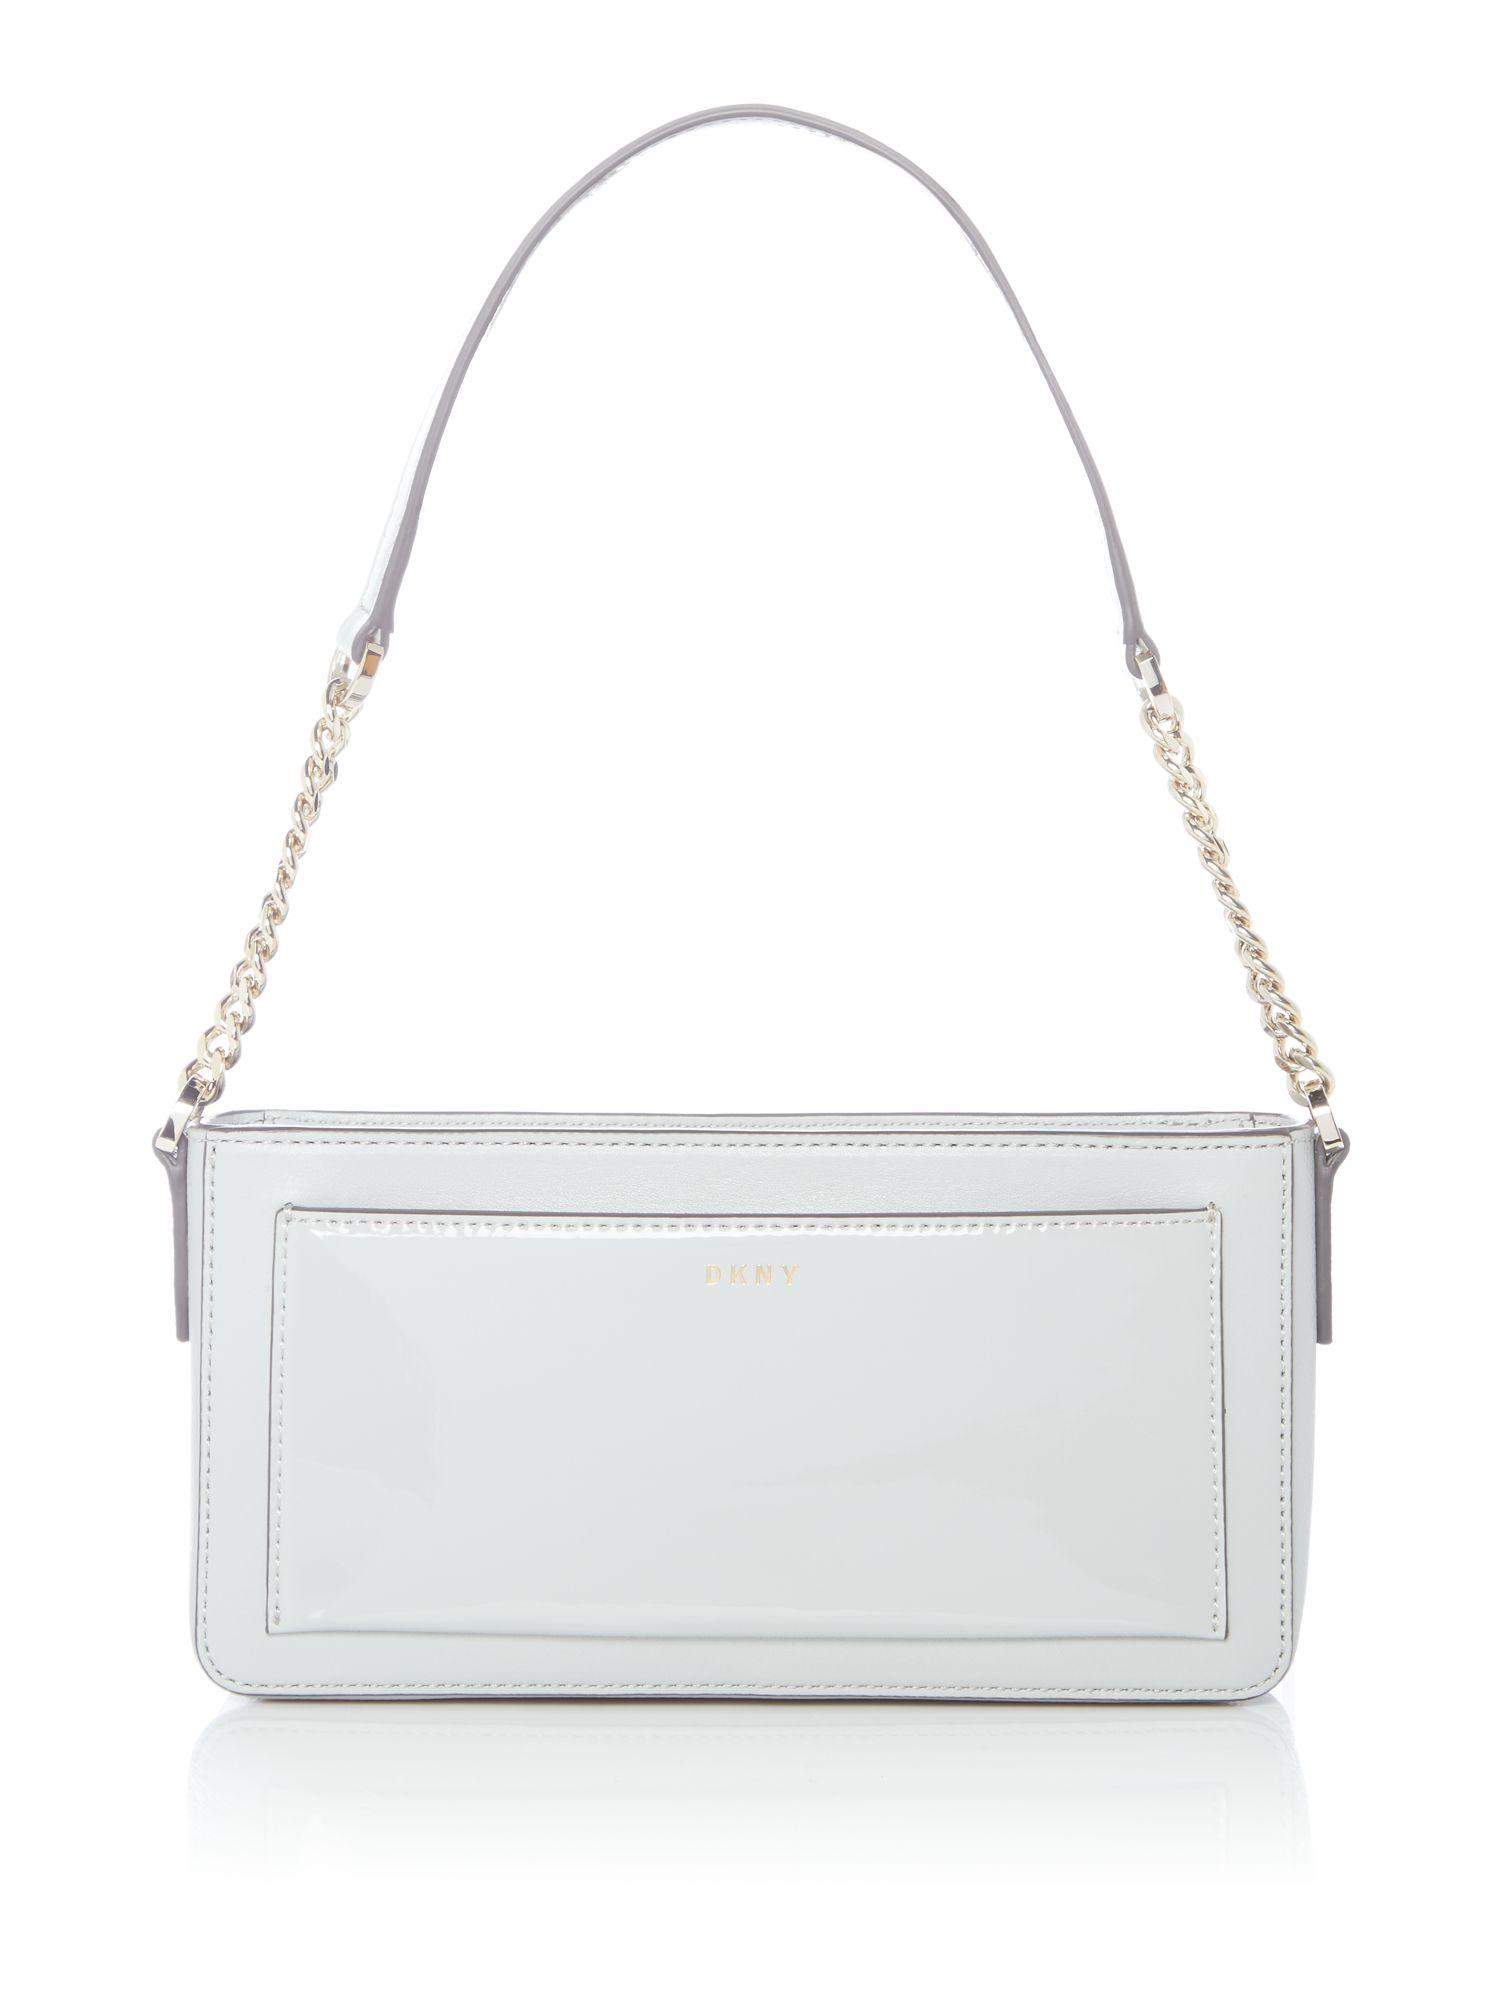 Dkny Saffiano Patent Light Grey Chain Shoulder Bag in Gray | Lyst